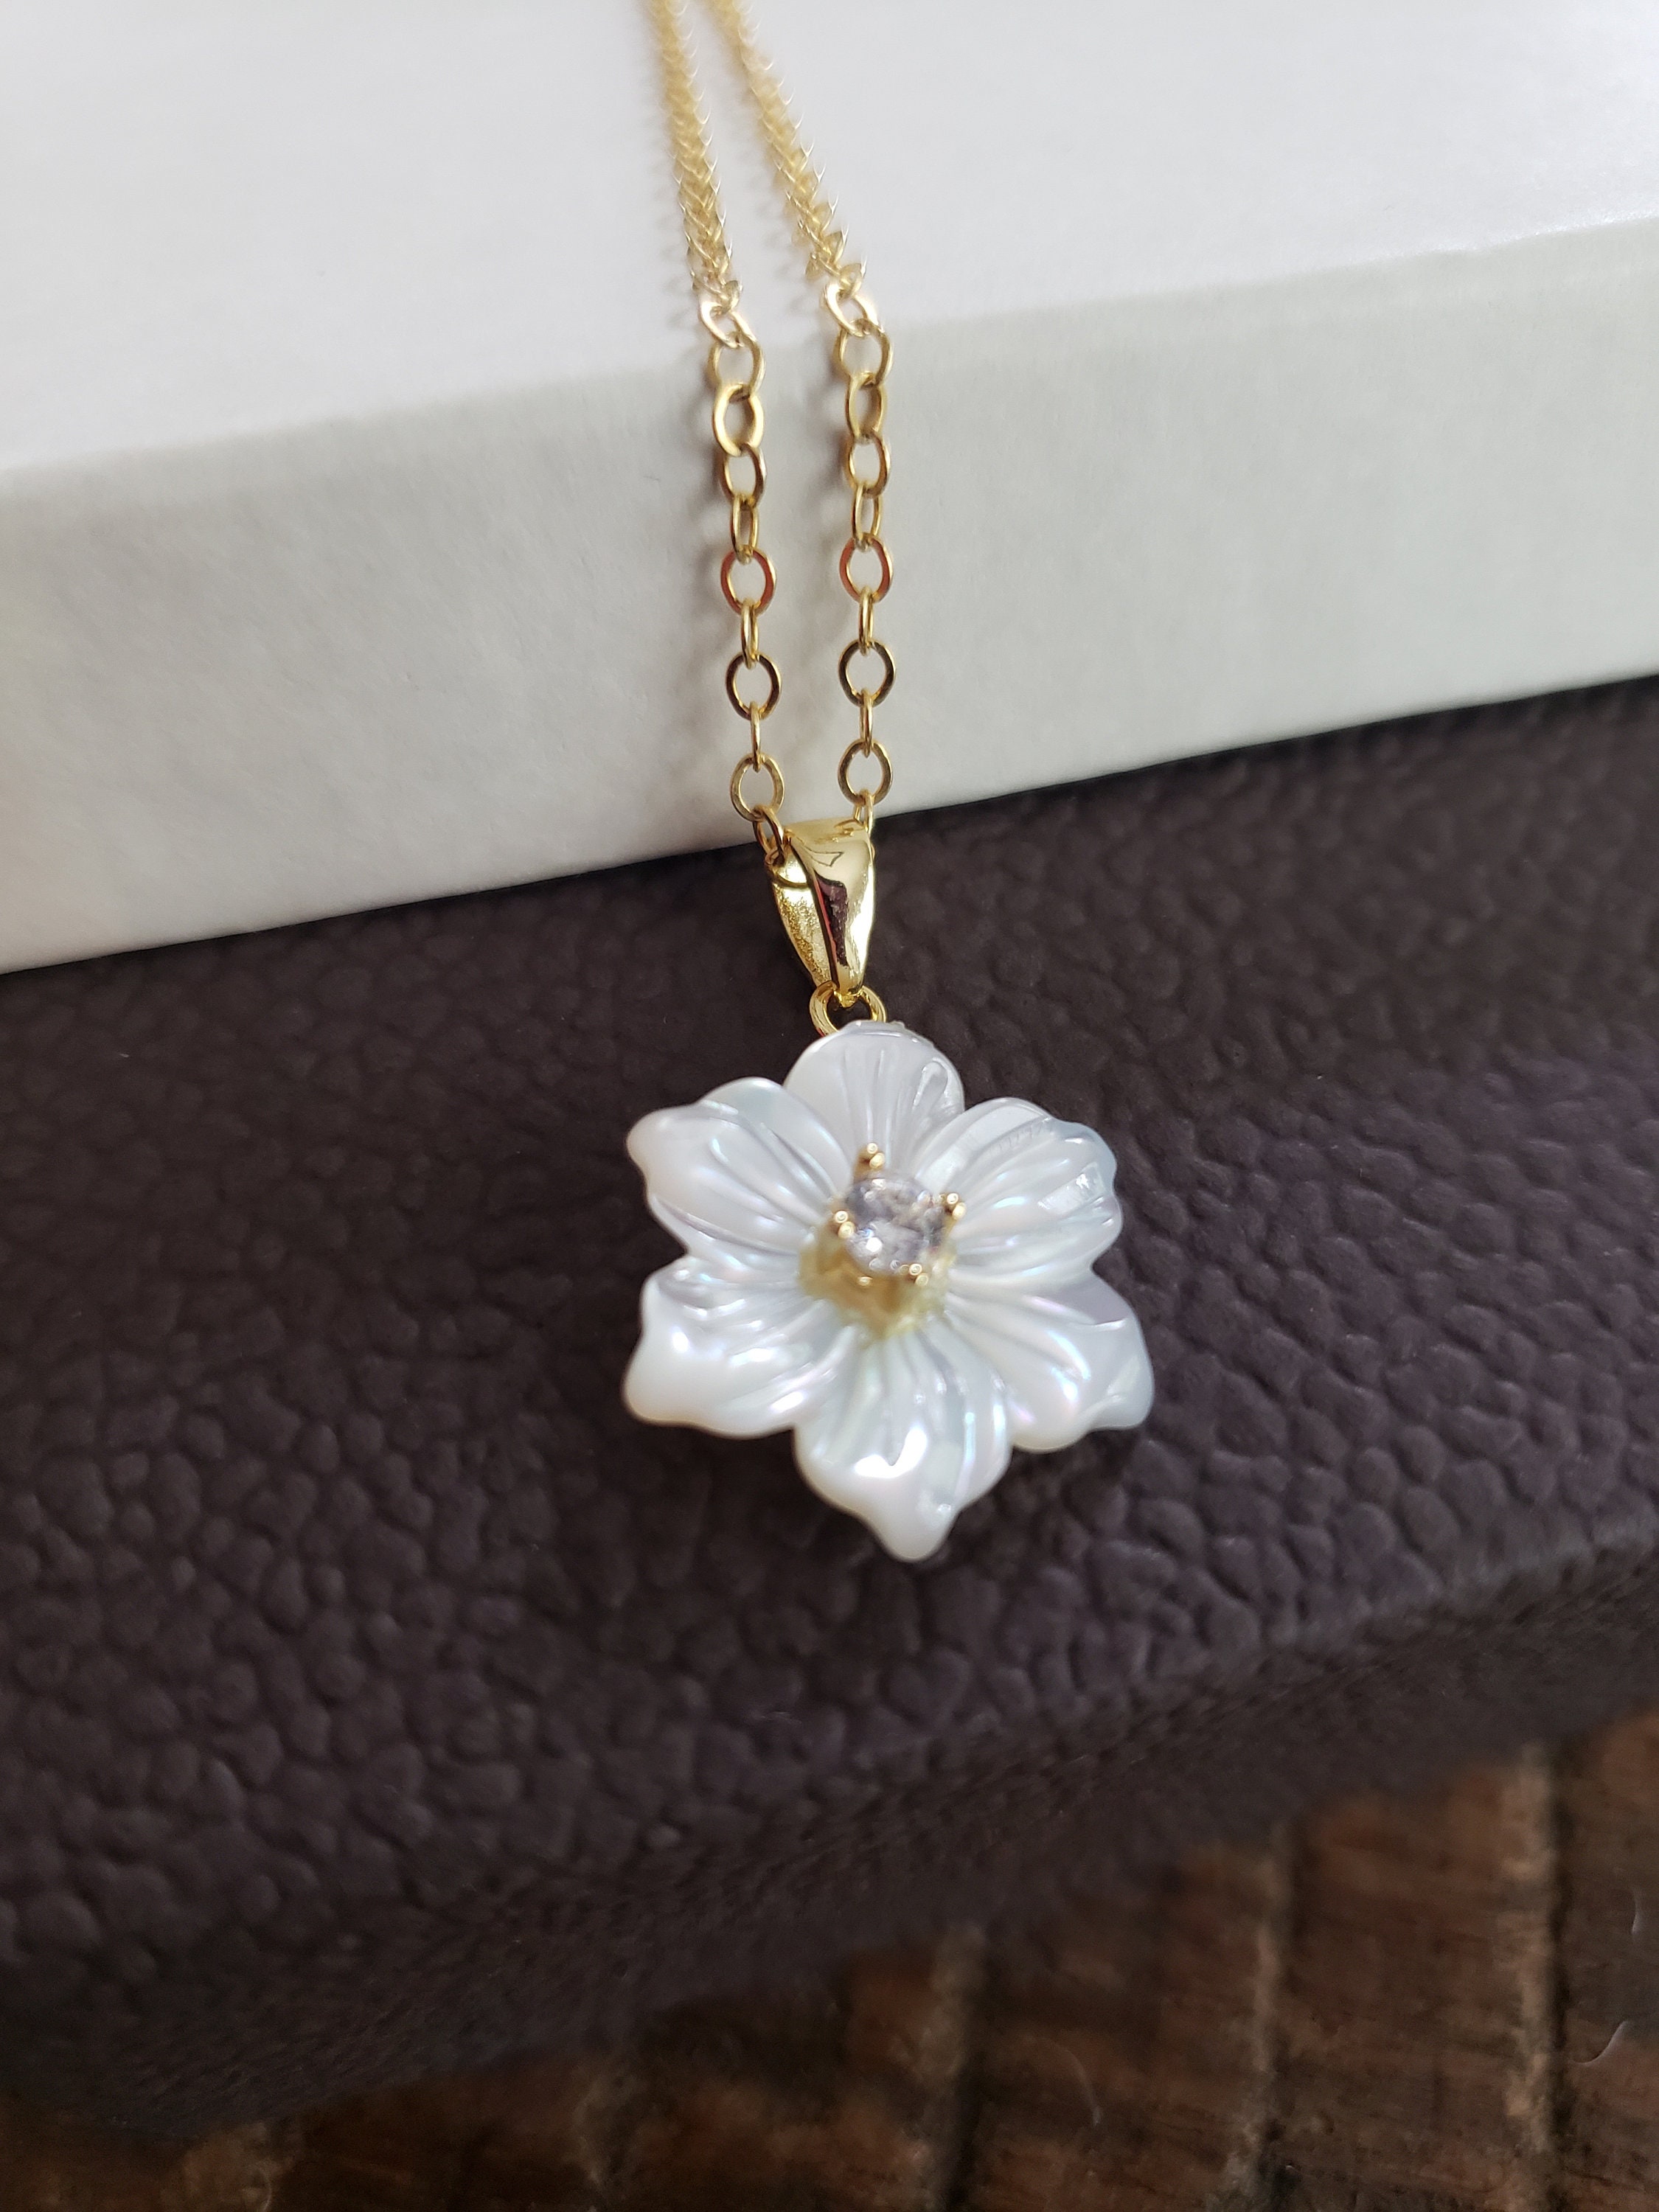 Lavari Jewelers Women's Mother of Pearl Flower Pendant Necklace